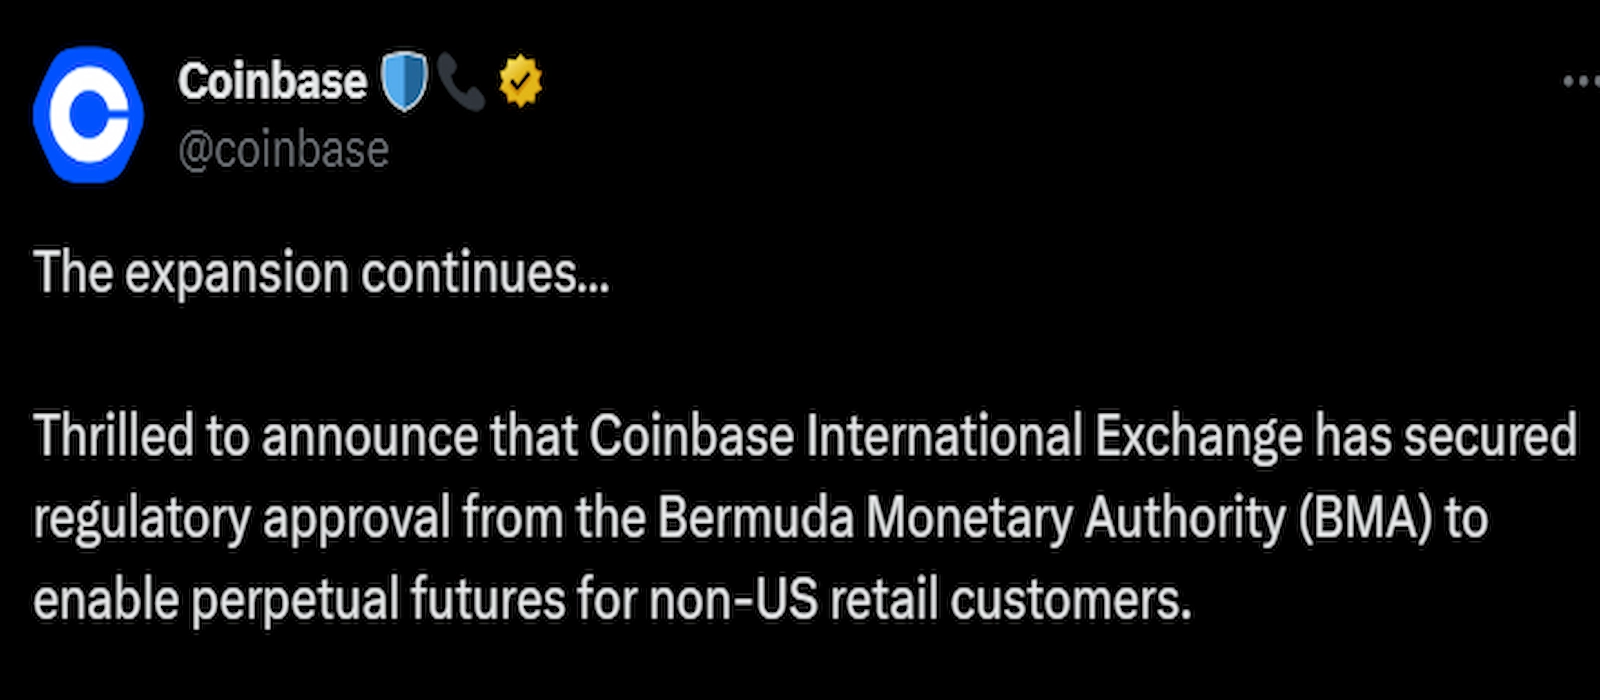 Coinbase has been expanding its global presence.